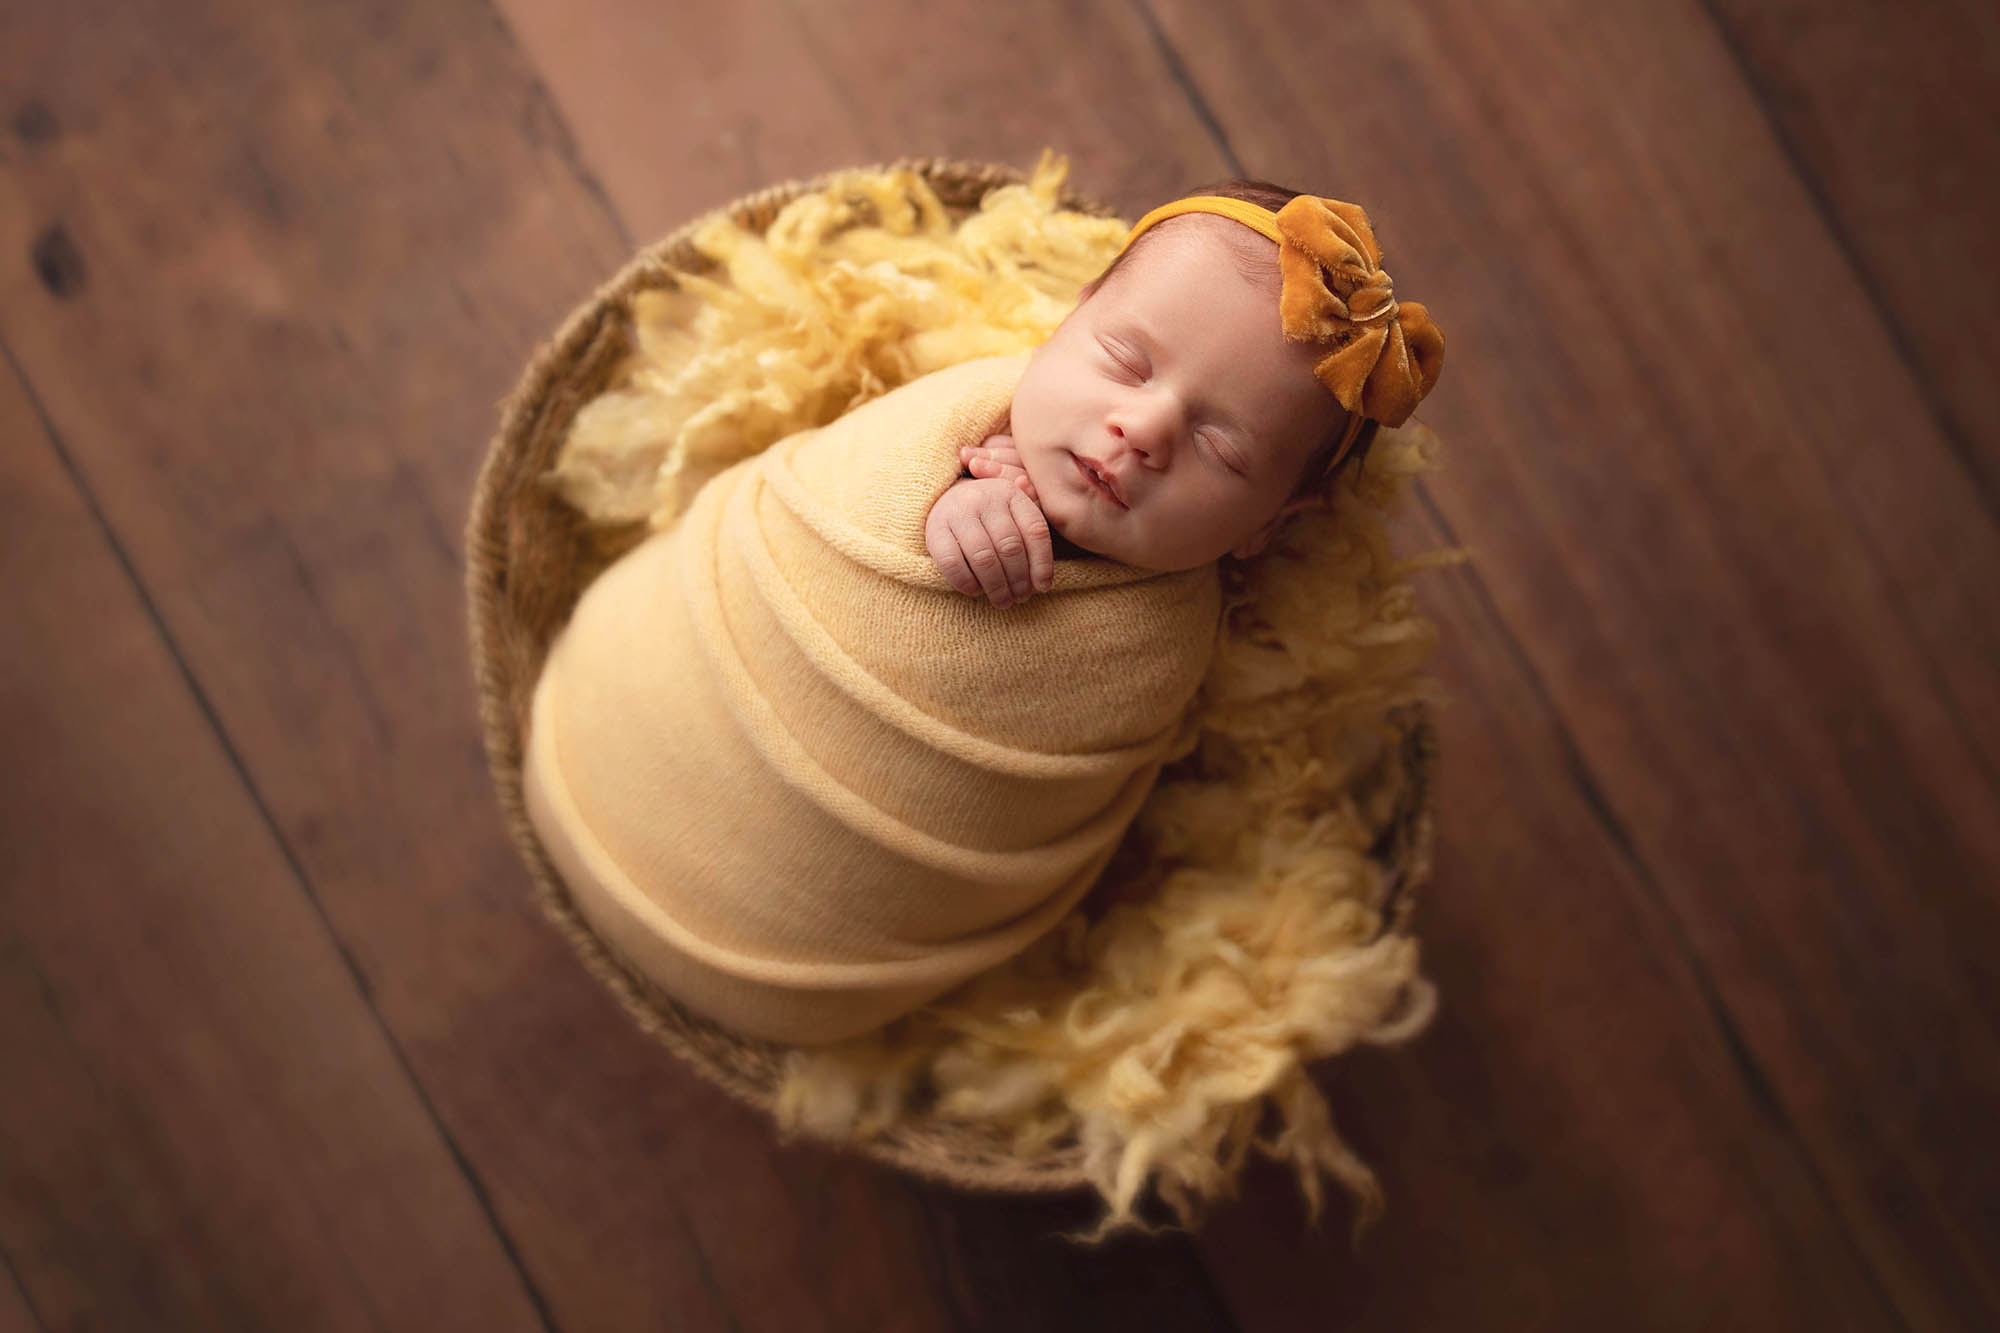 Baby posed in a yellow basket